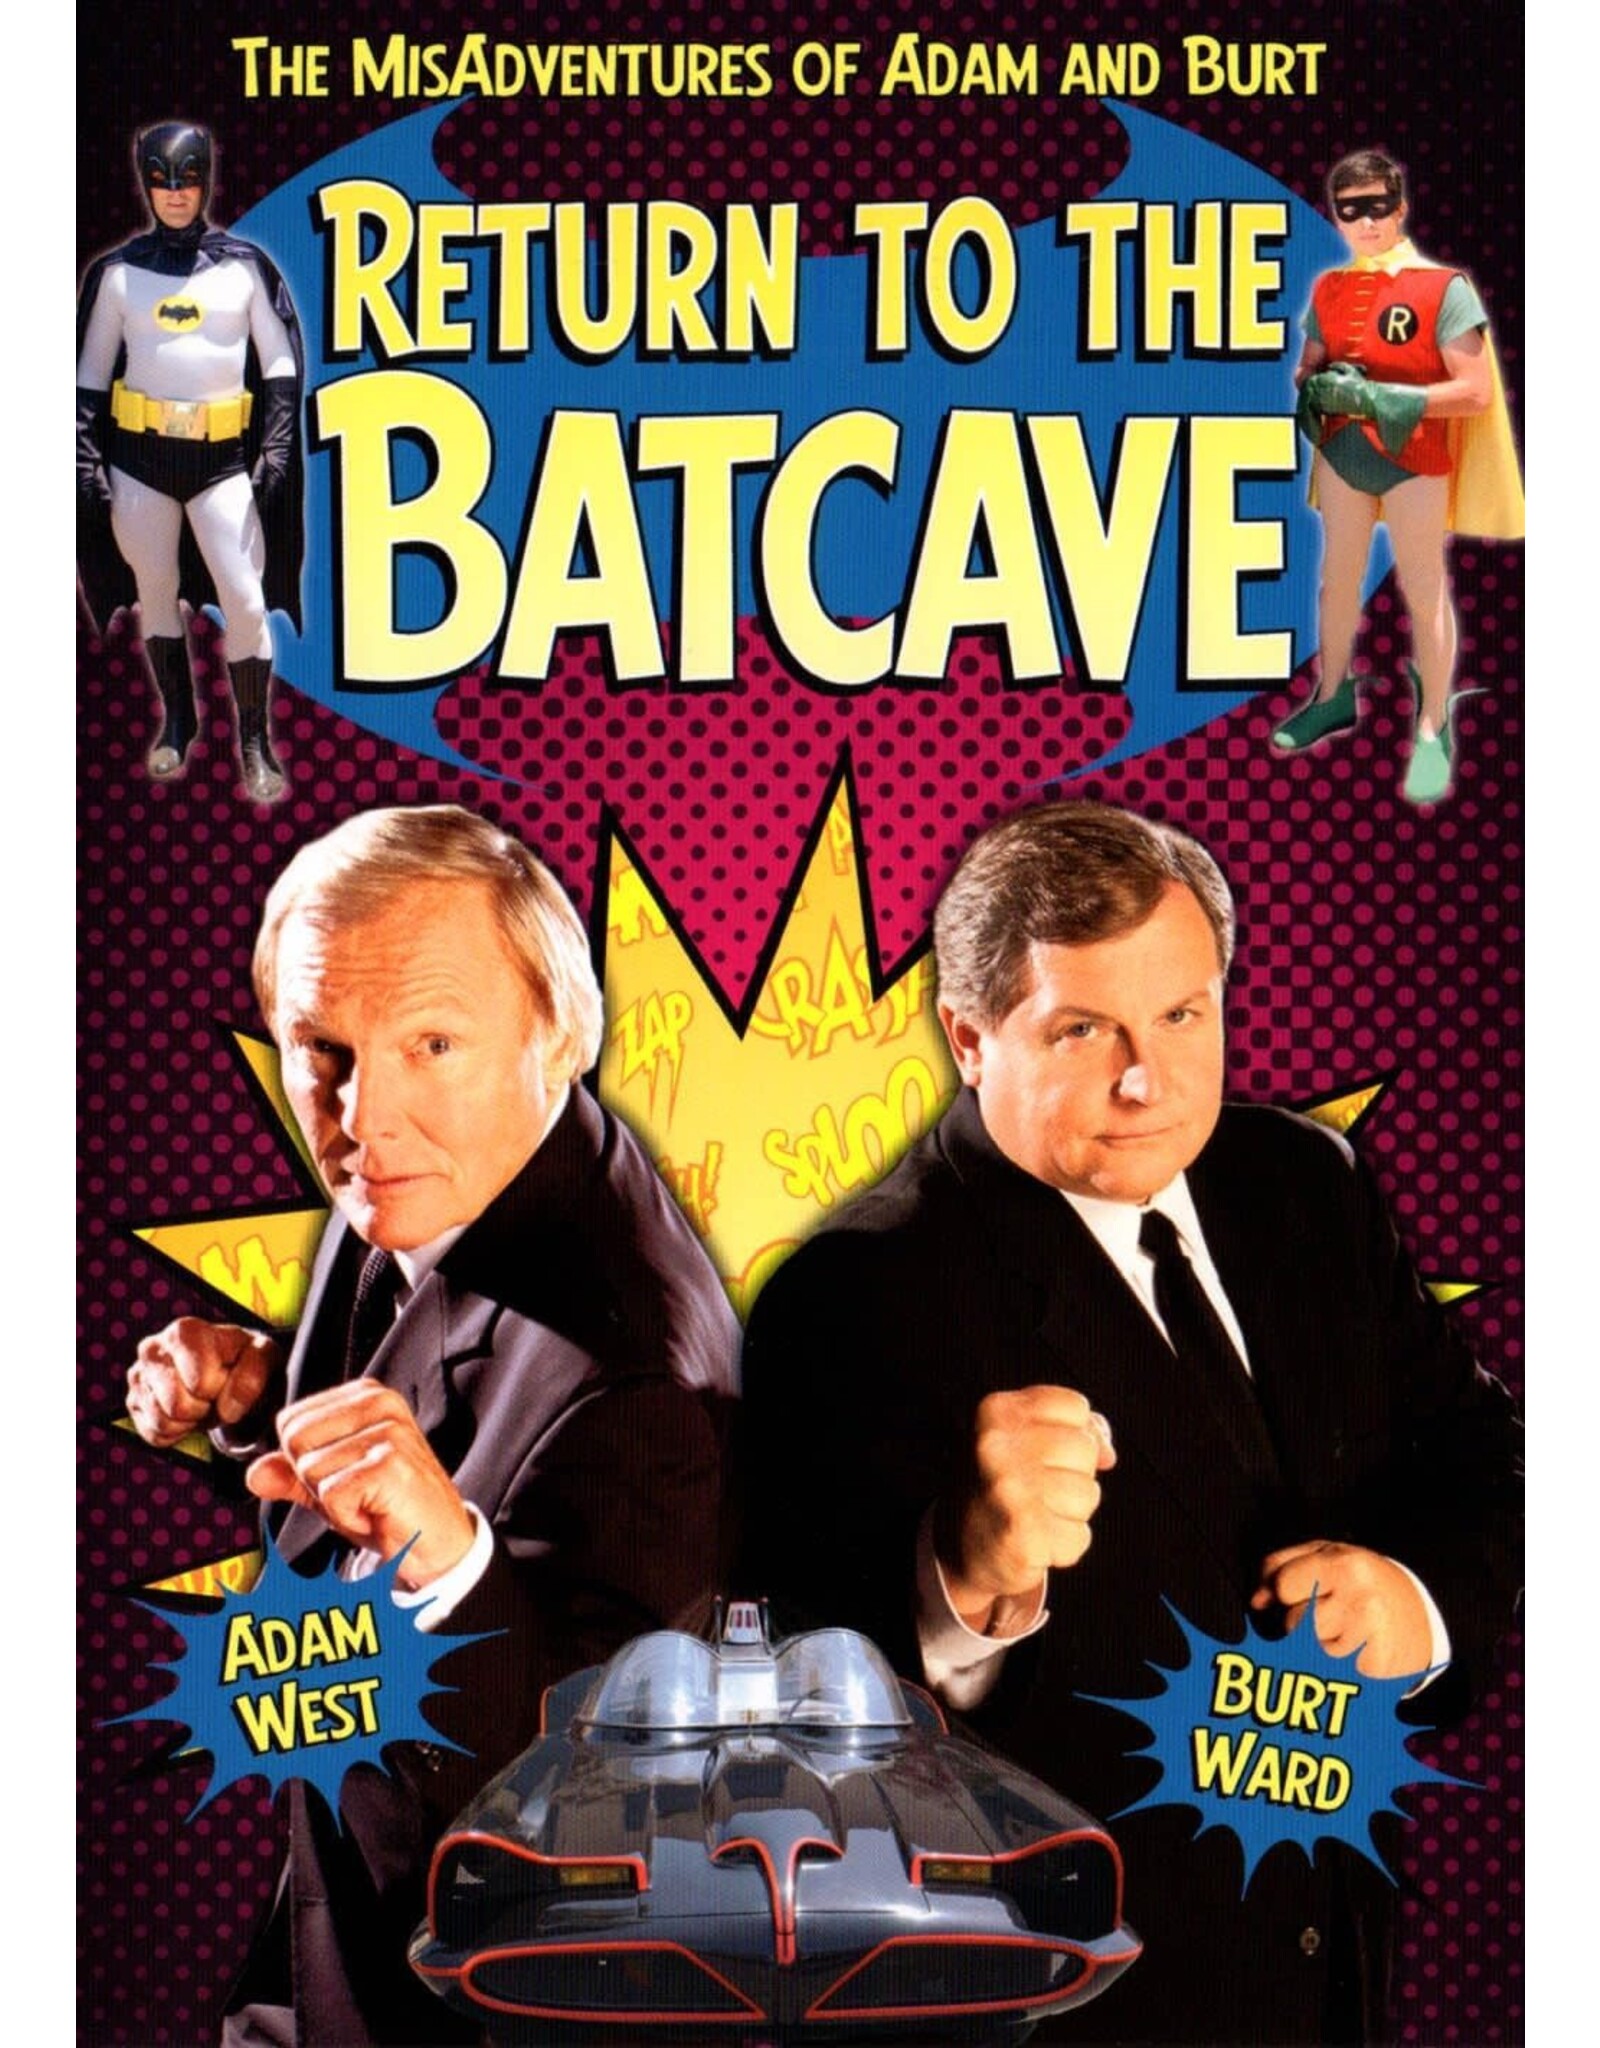 Cult & Cool Return to the Batcave (Used)